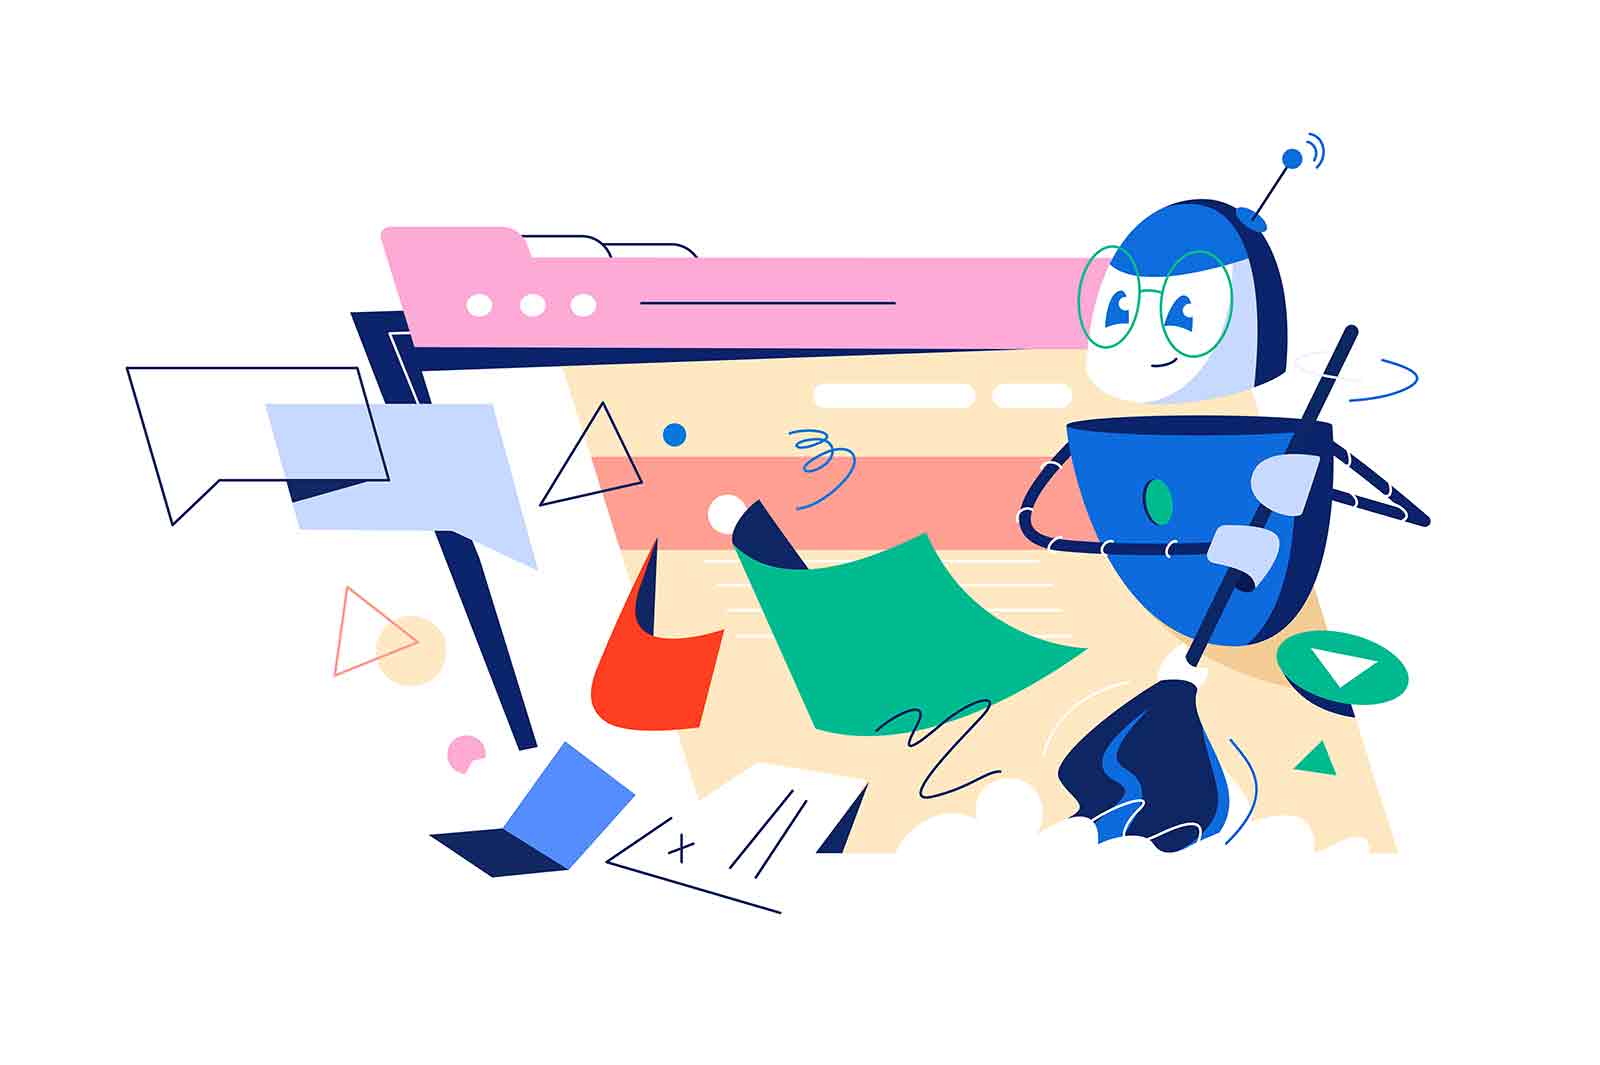 The robot cleans a littered web page, vector illustration. A friendly robot puts things in order on the site.